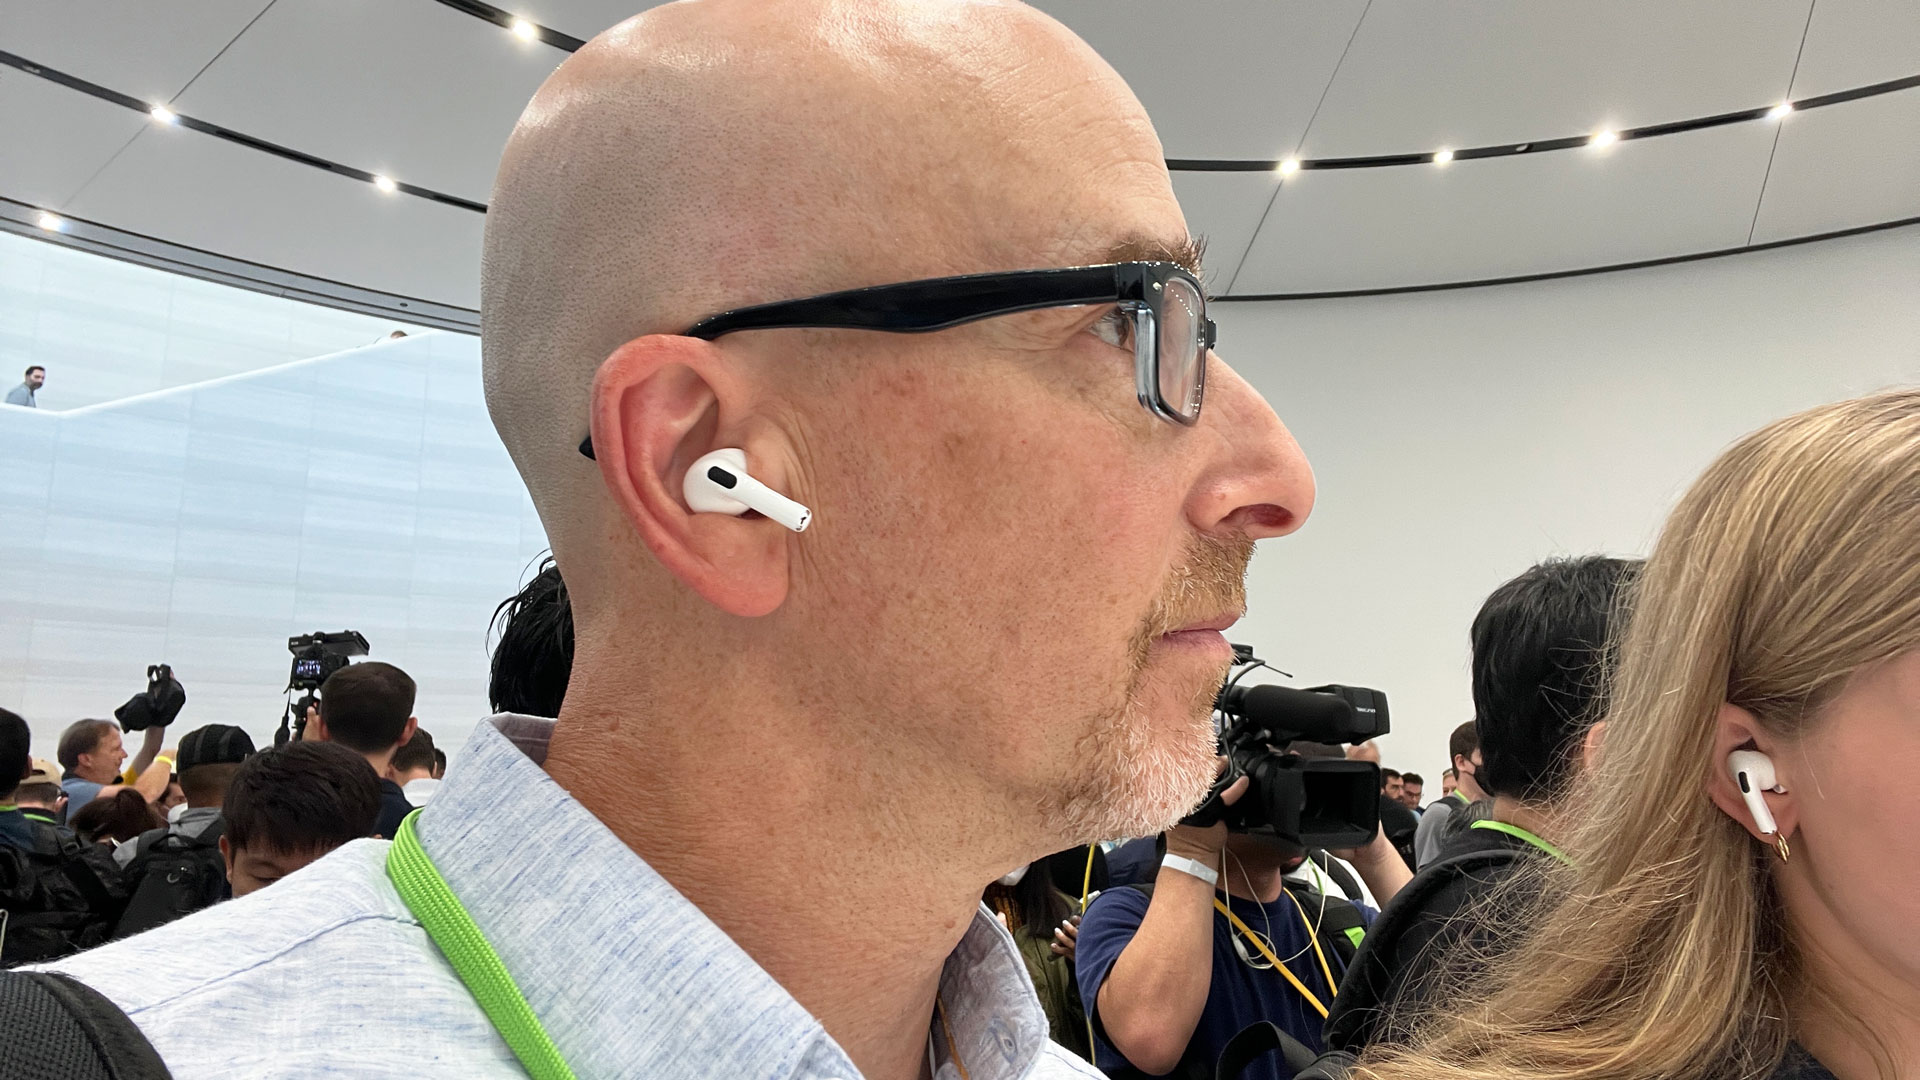 Apple AirPods Pro 2 in the ear